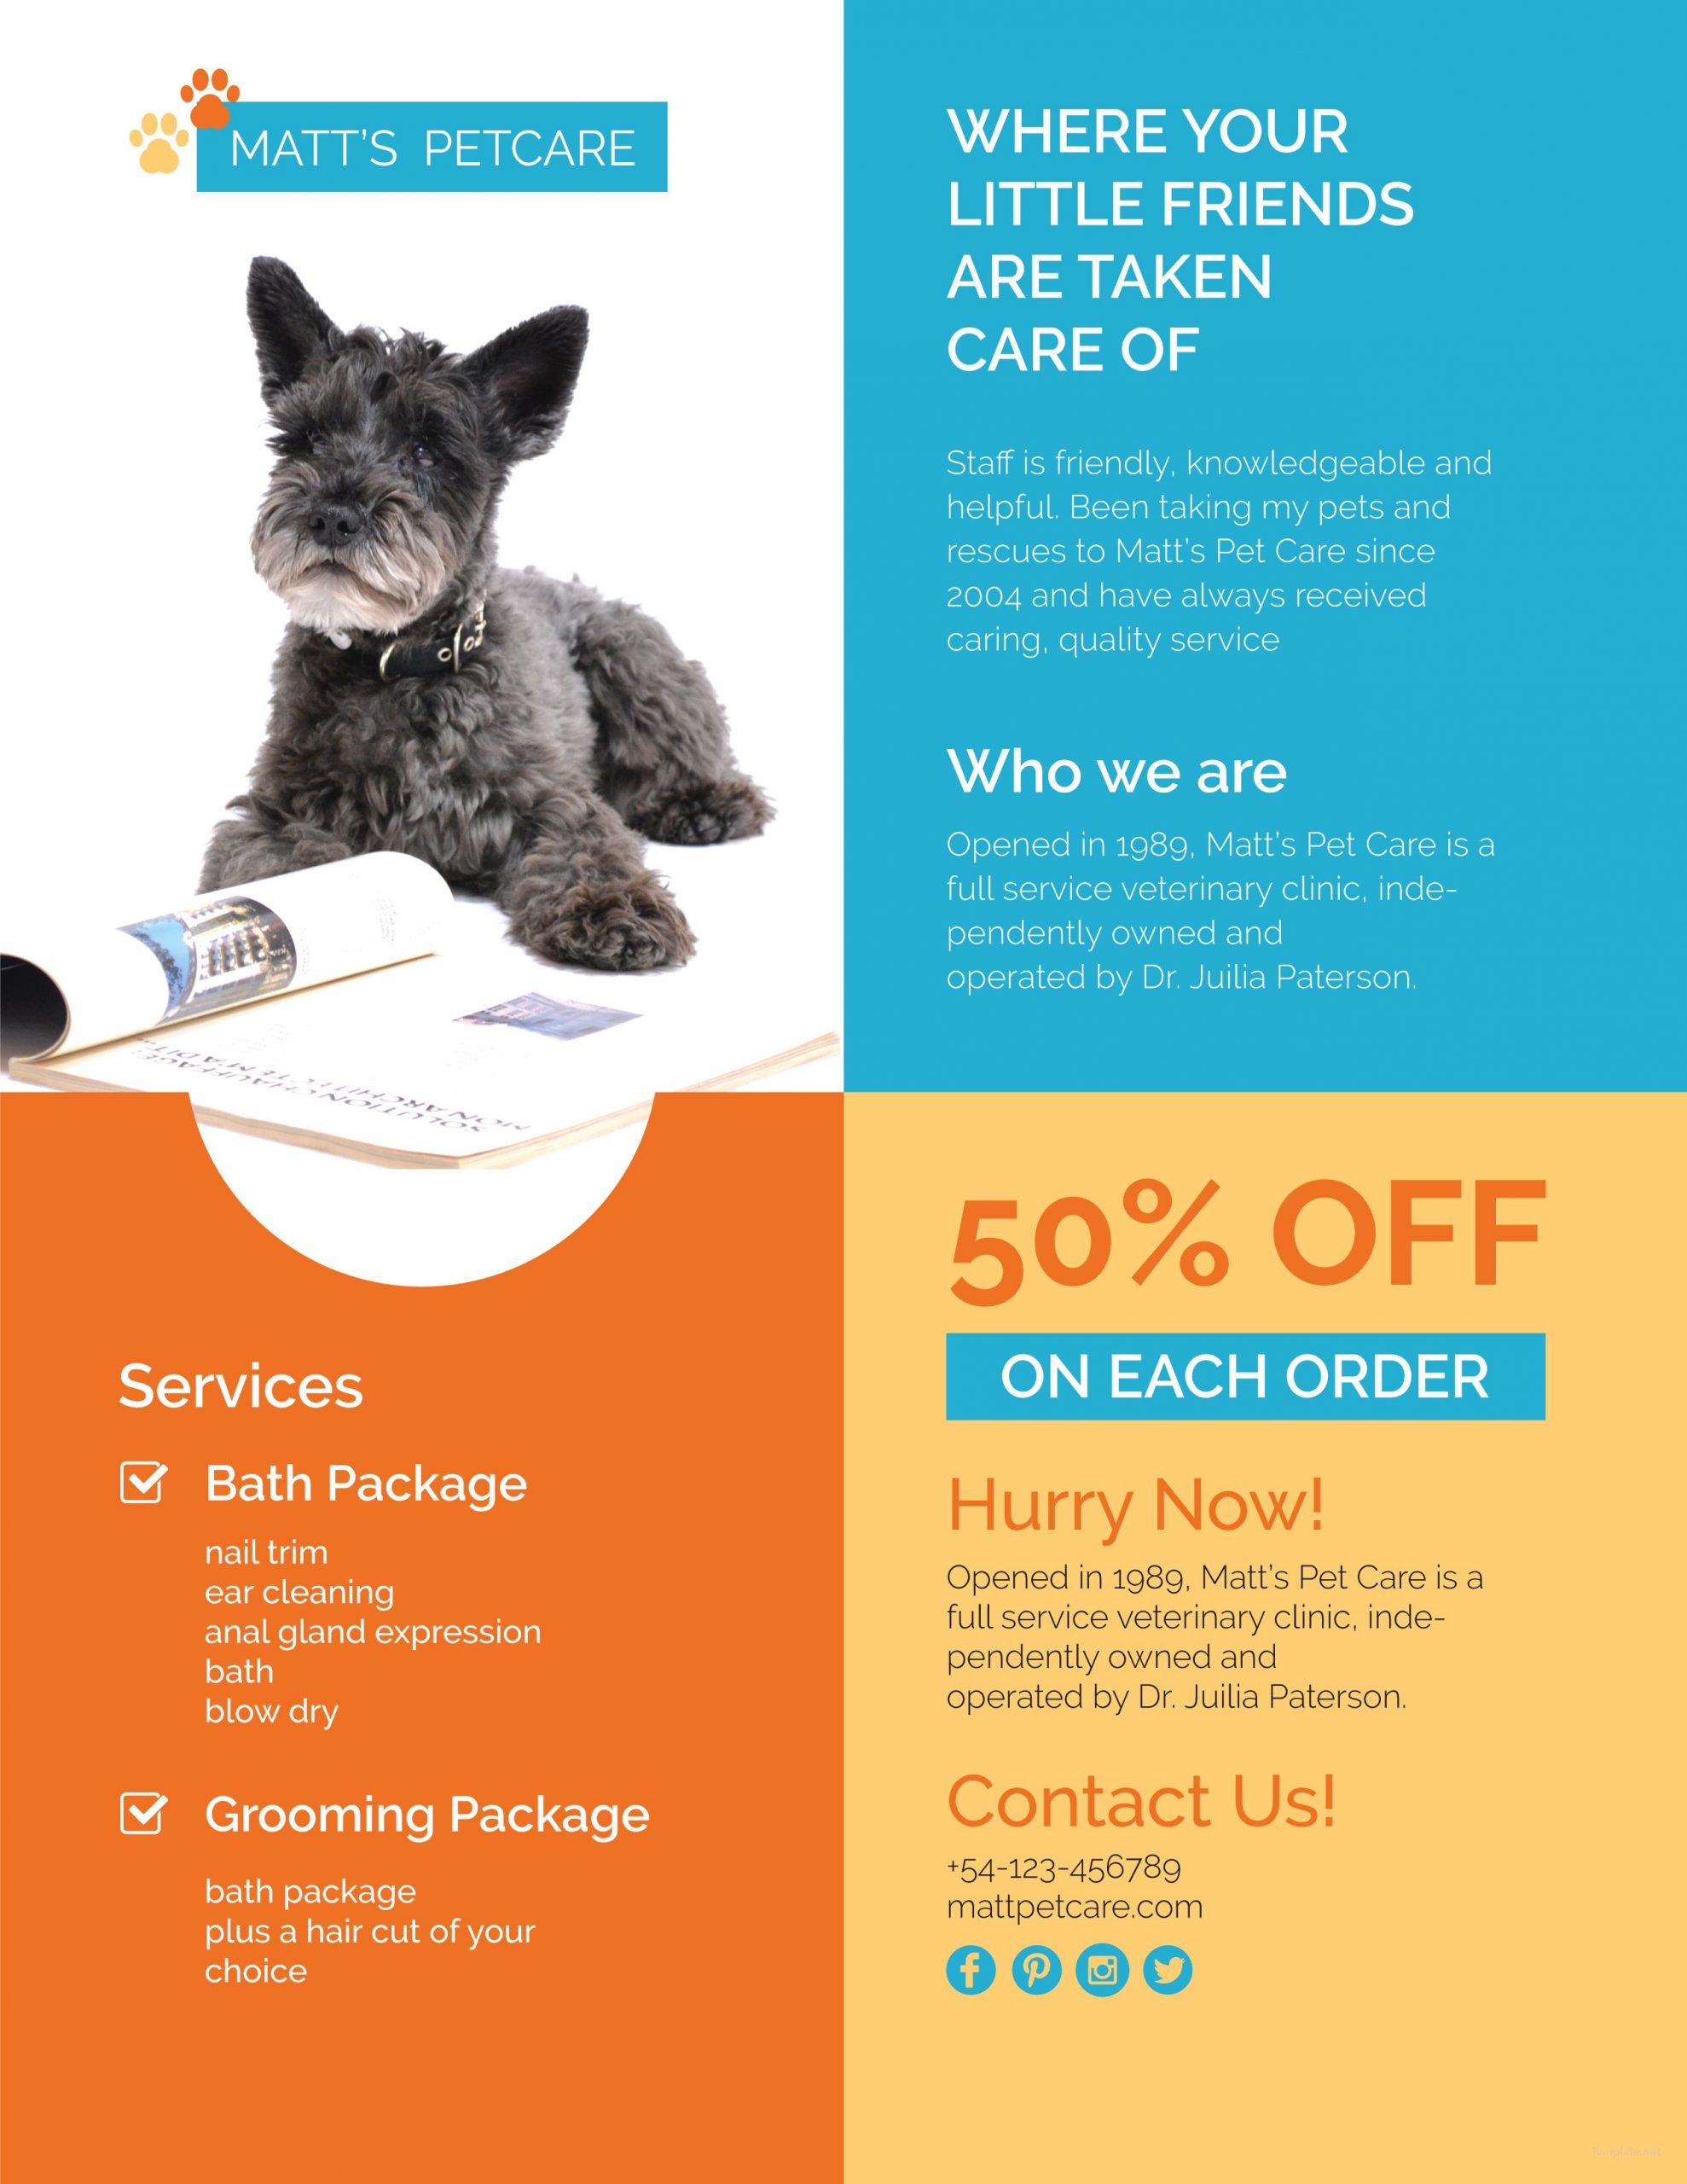 pet sitter flyer template free download, pet sitting flyer template free, dog sitting template free, dog sitting flyer template, pet sitting flyer templates free printable